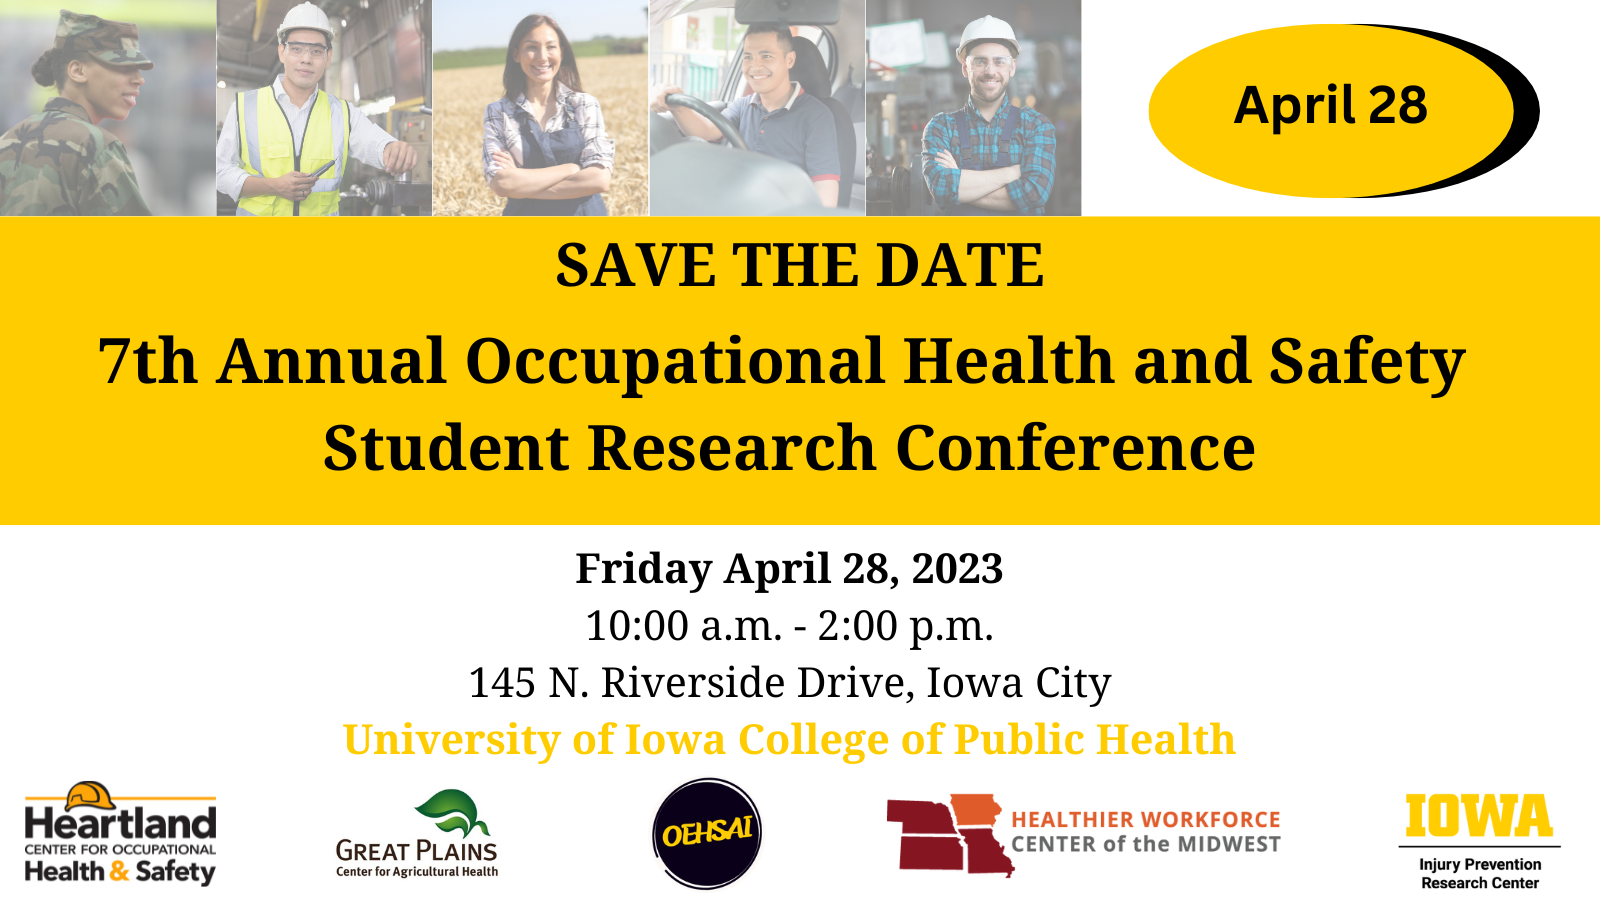 Save the date for the 7th Annual Occupational Health and Safety Student Research Conference.